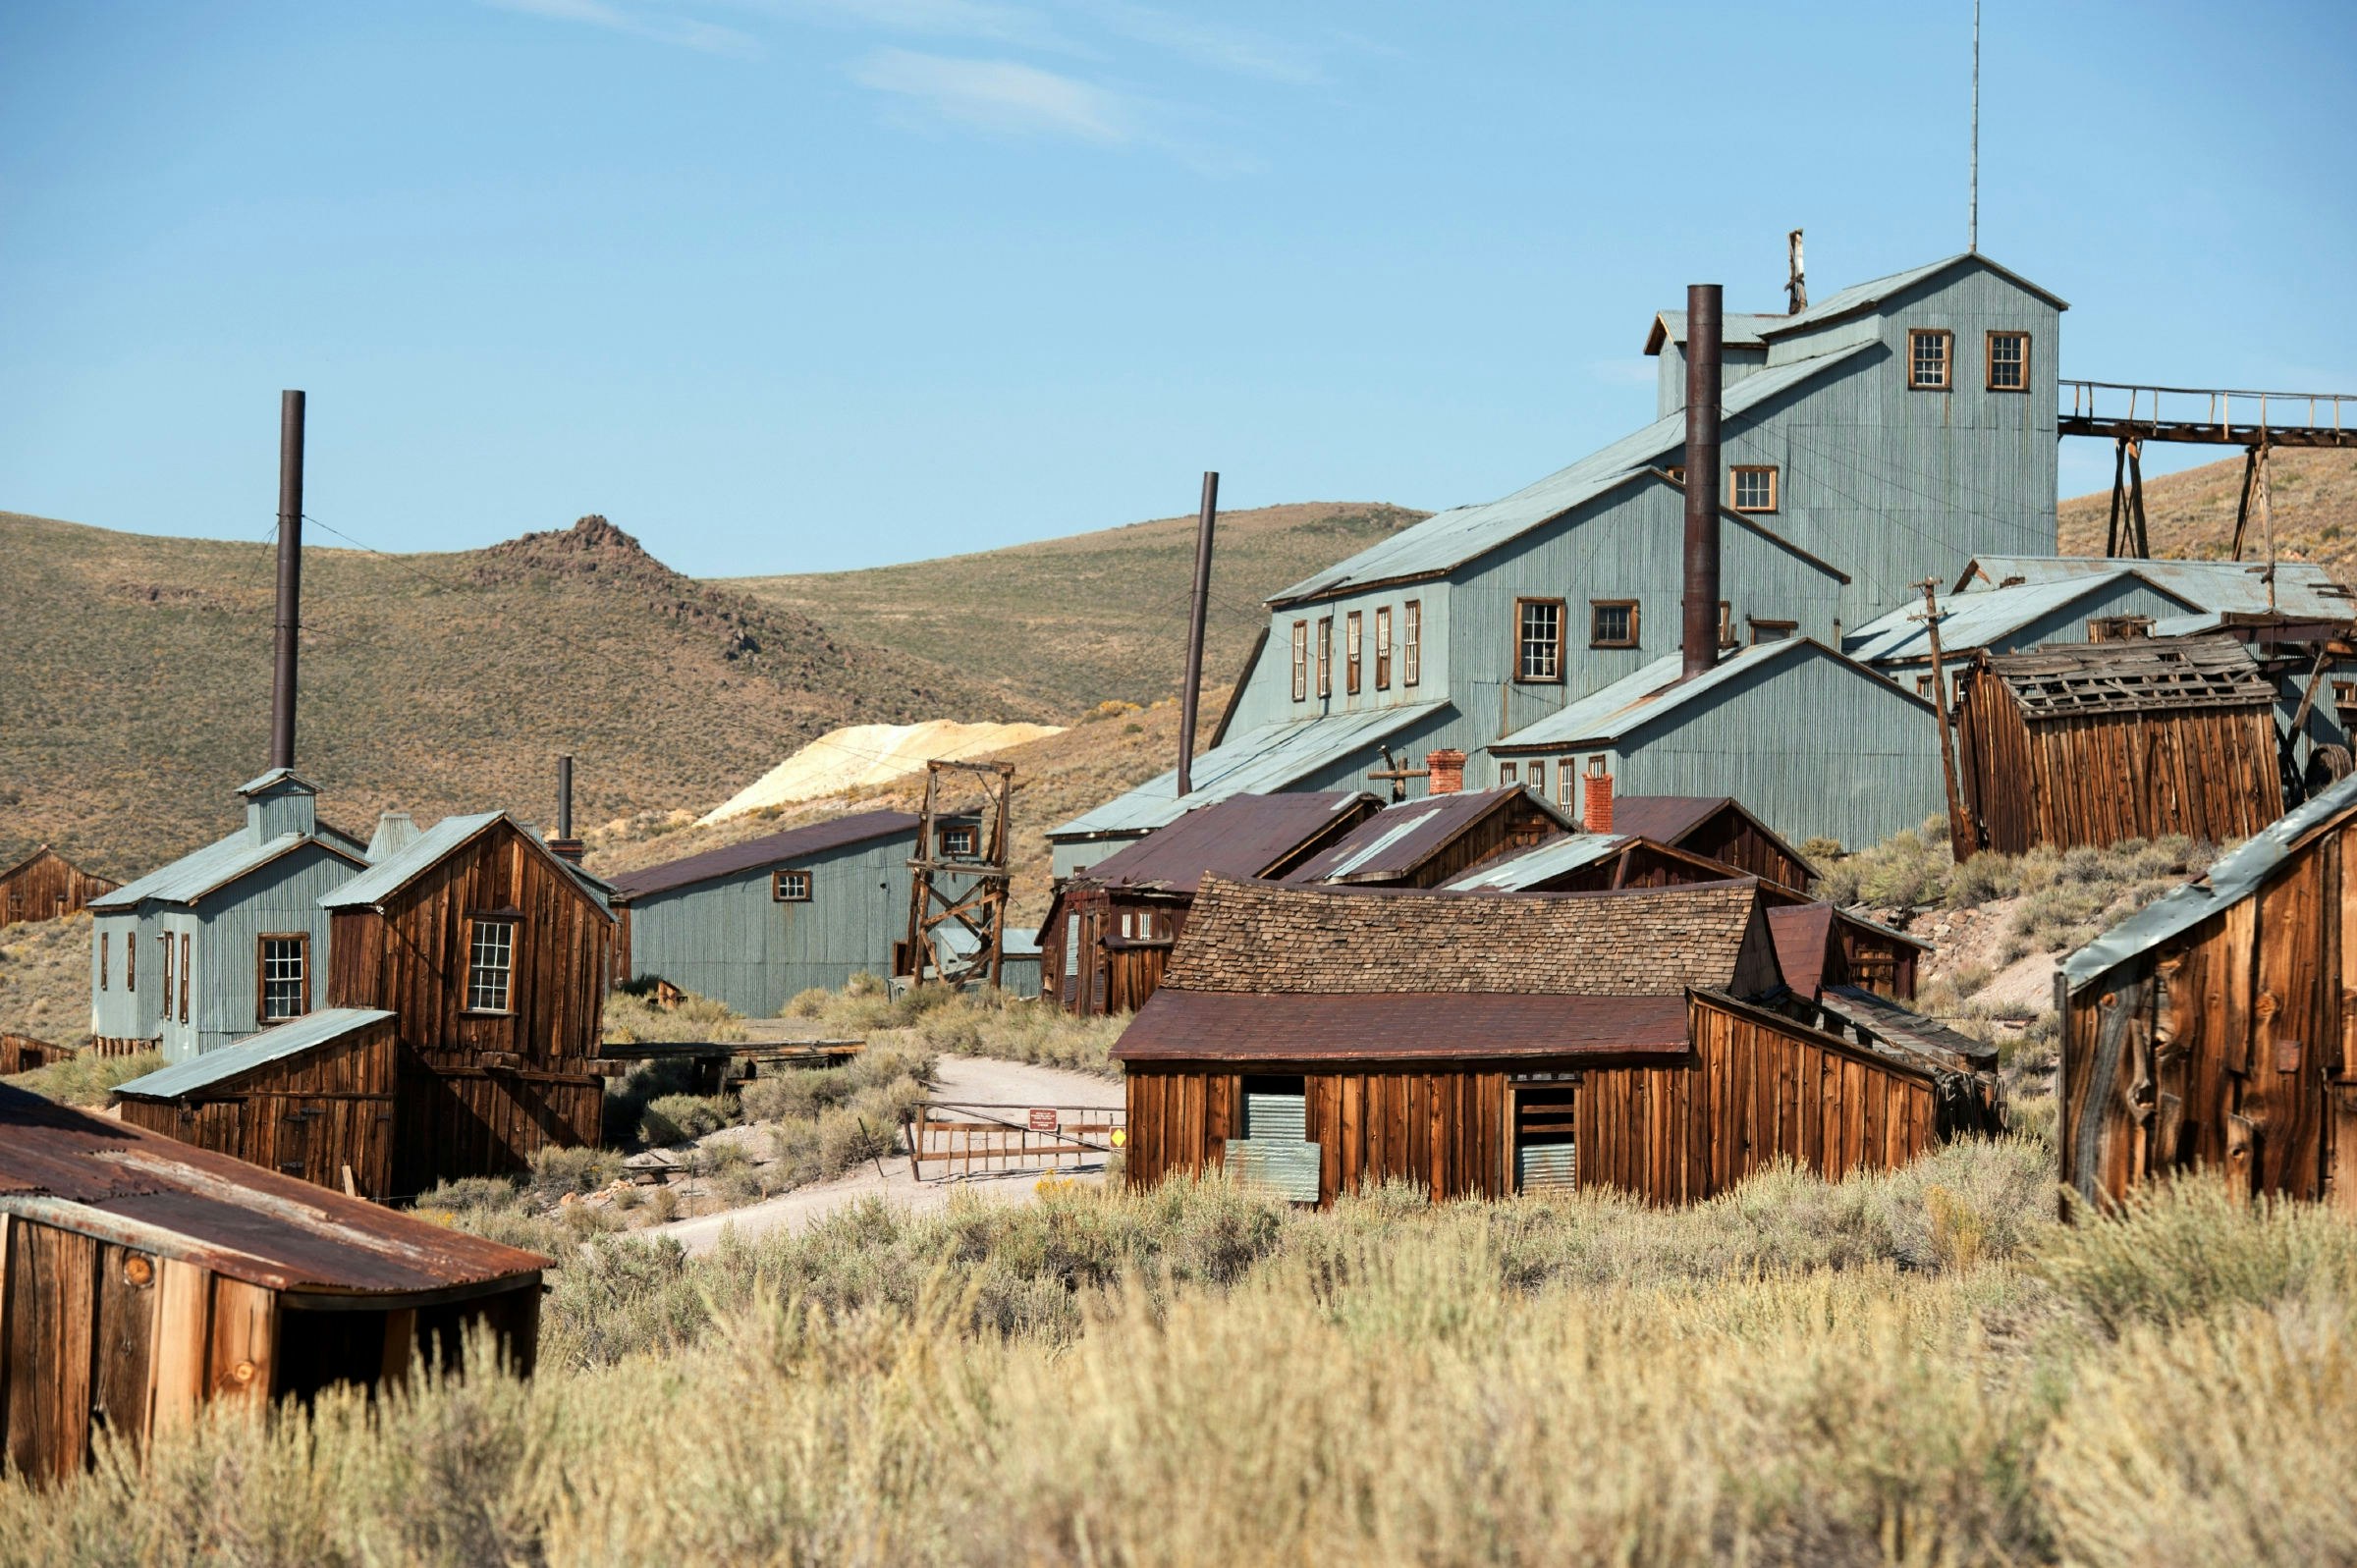 Travellers are flocking to these ghost towns and abandoned places